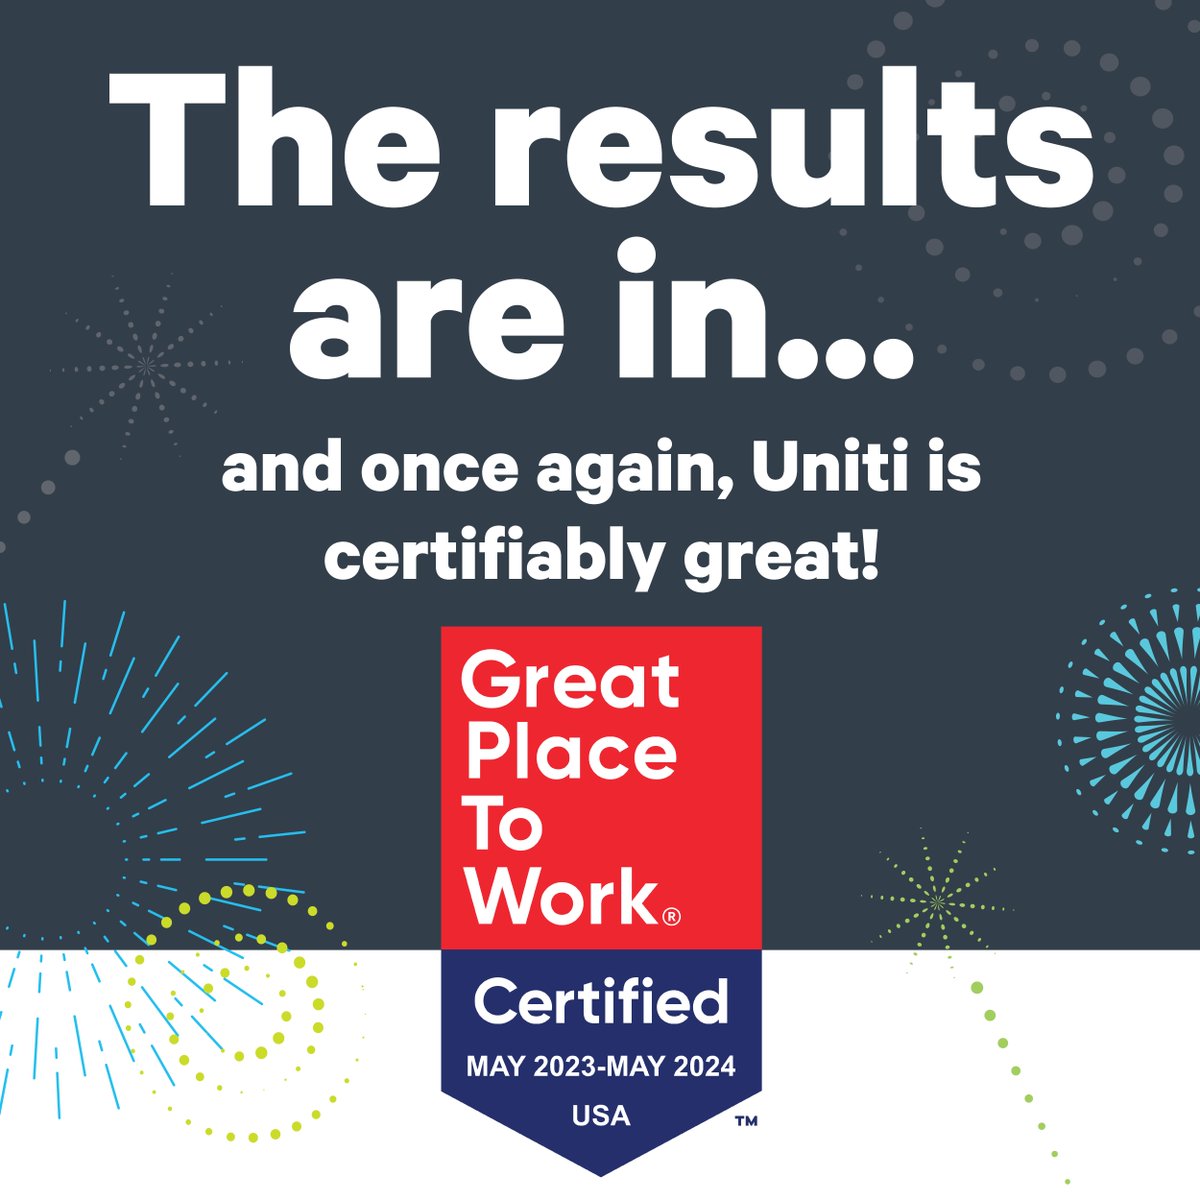 #Uniti is at it again with our #GreatPlacetoWork recertification for 2023-2024! Love being part of this company and this team! @GPTW_US #GPTWcertified #teamUniti